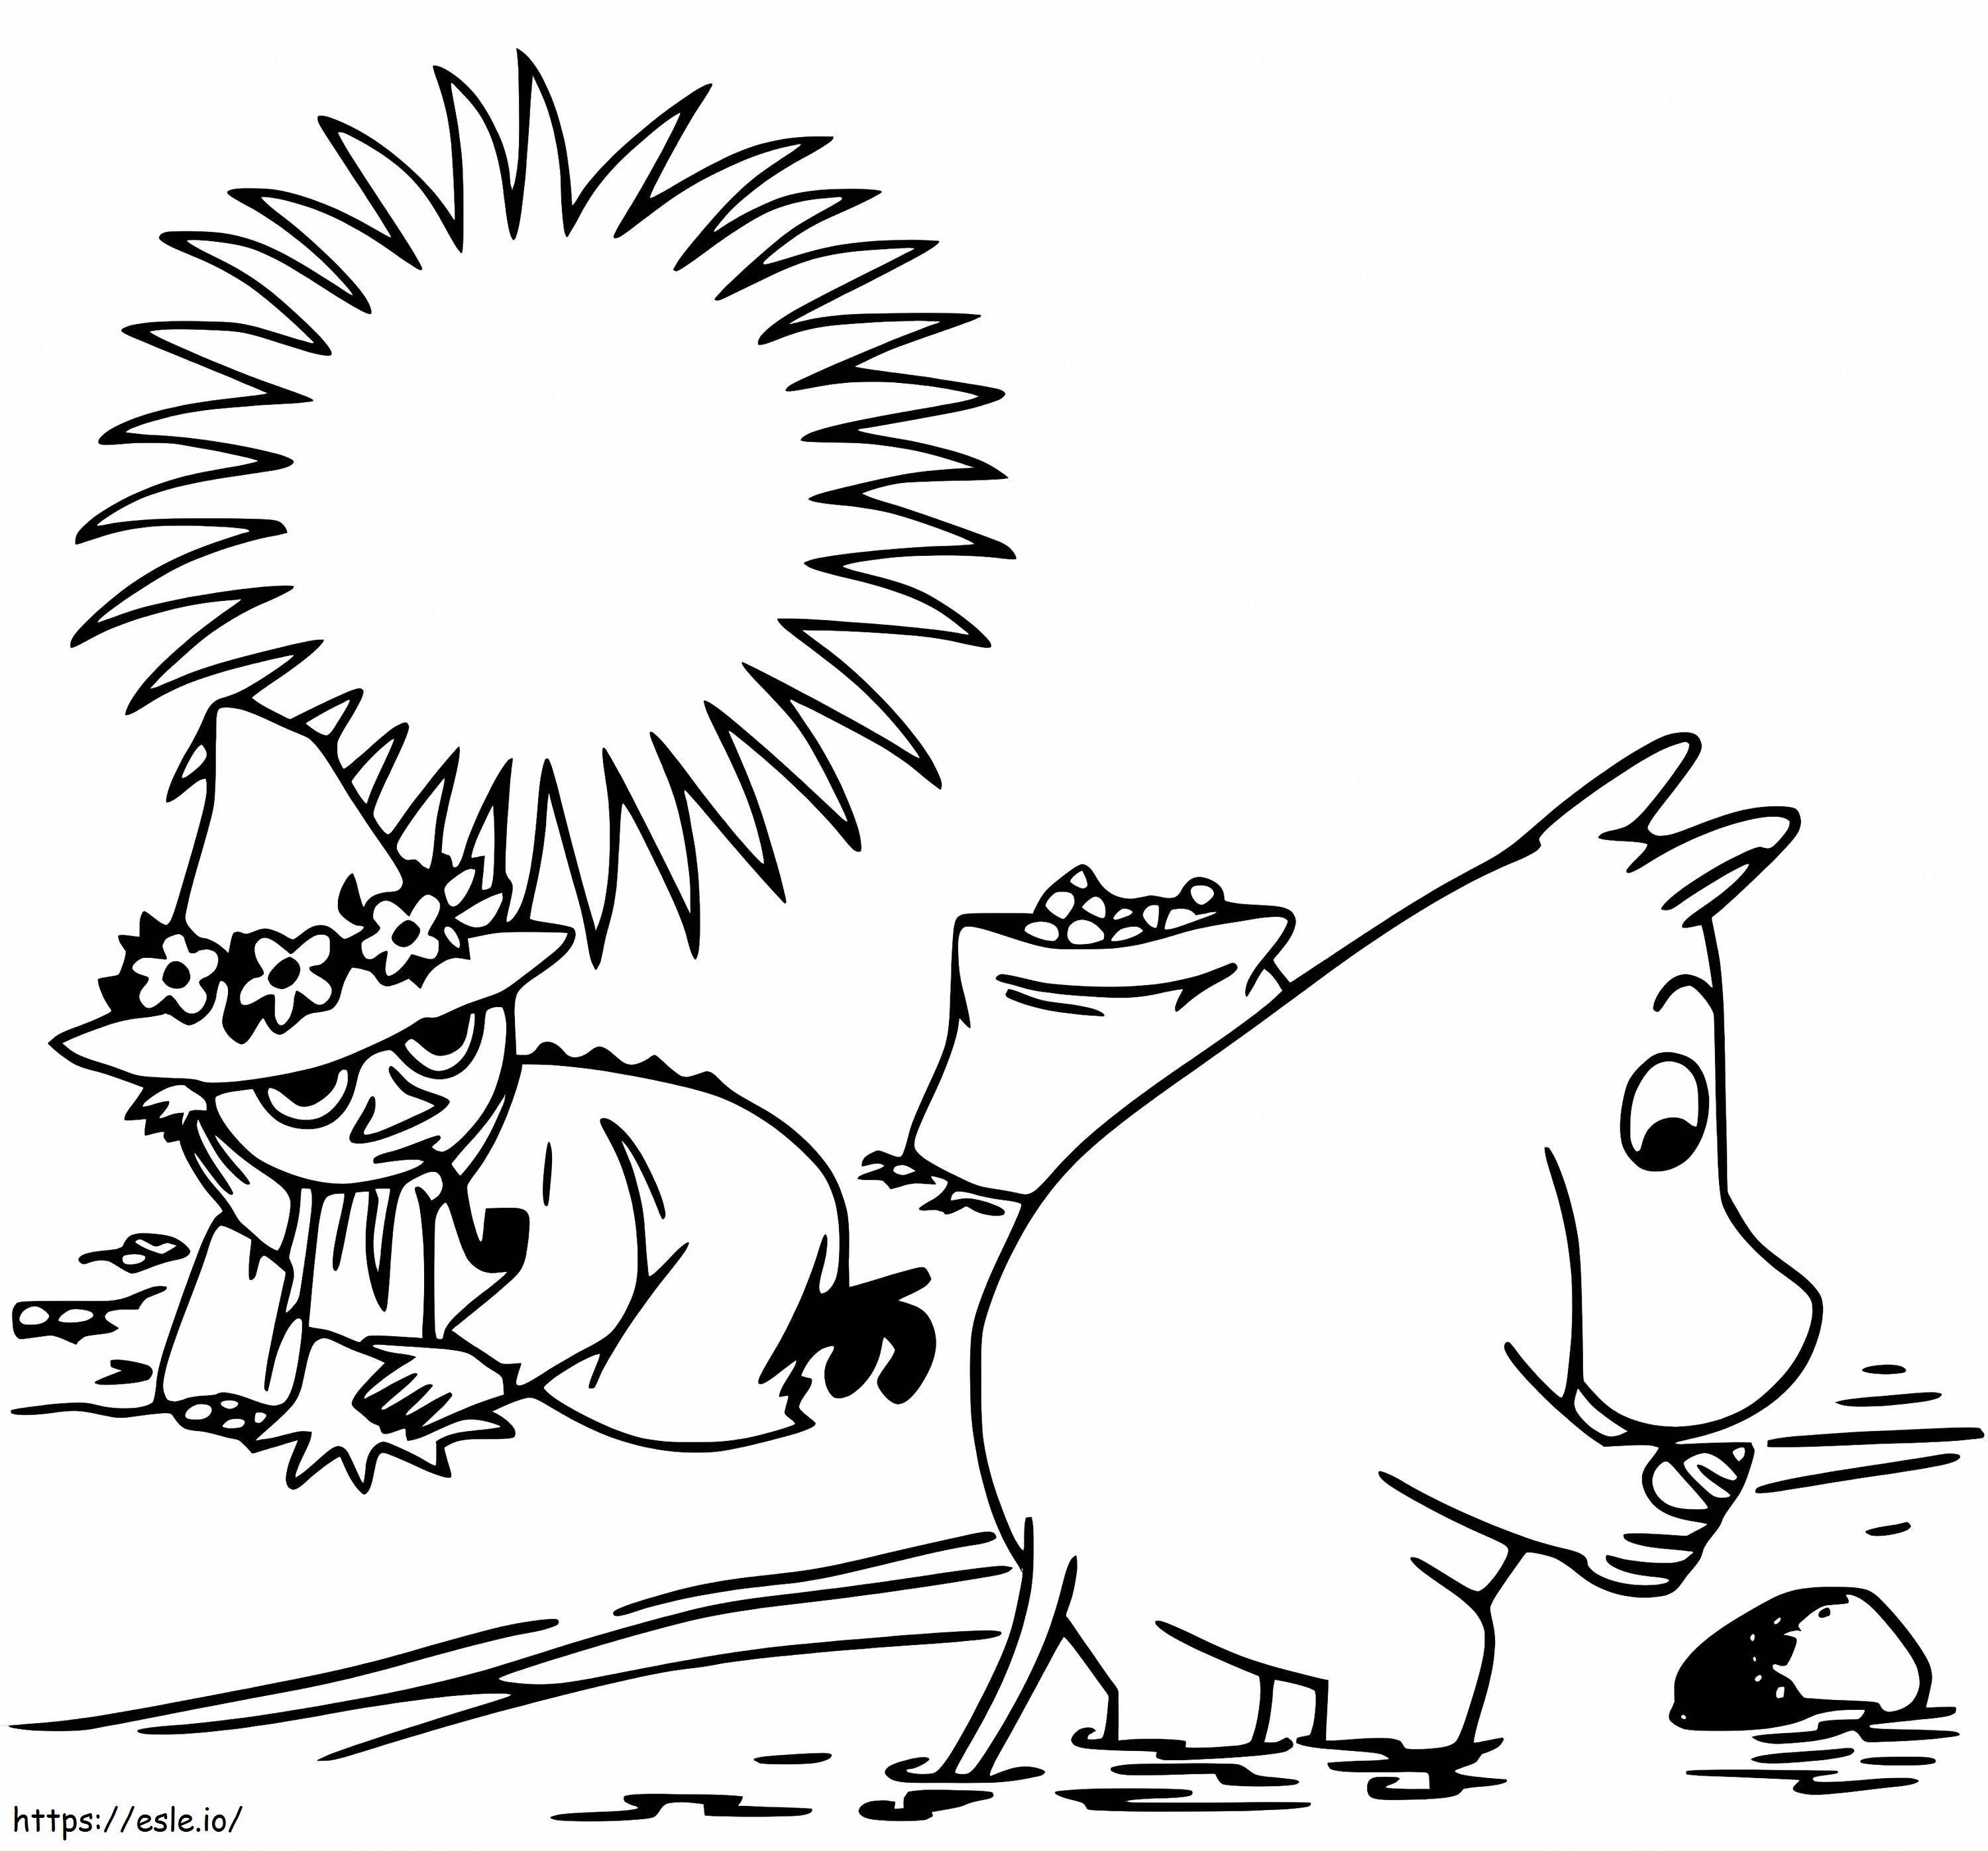 Moomintroll And Surfkin coloring page